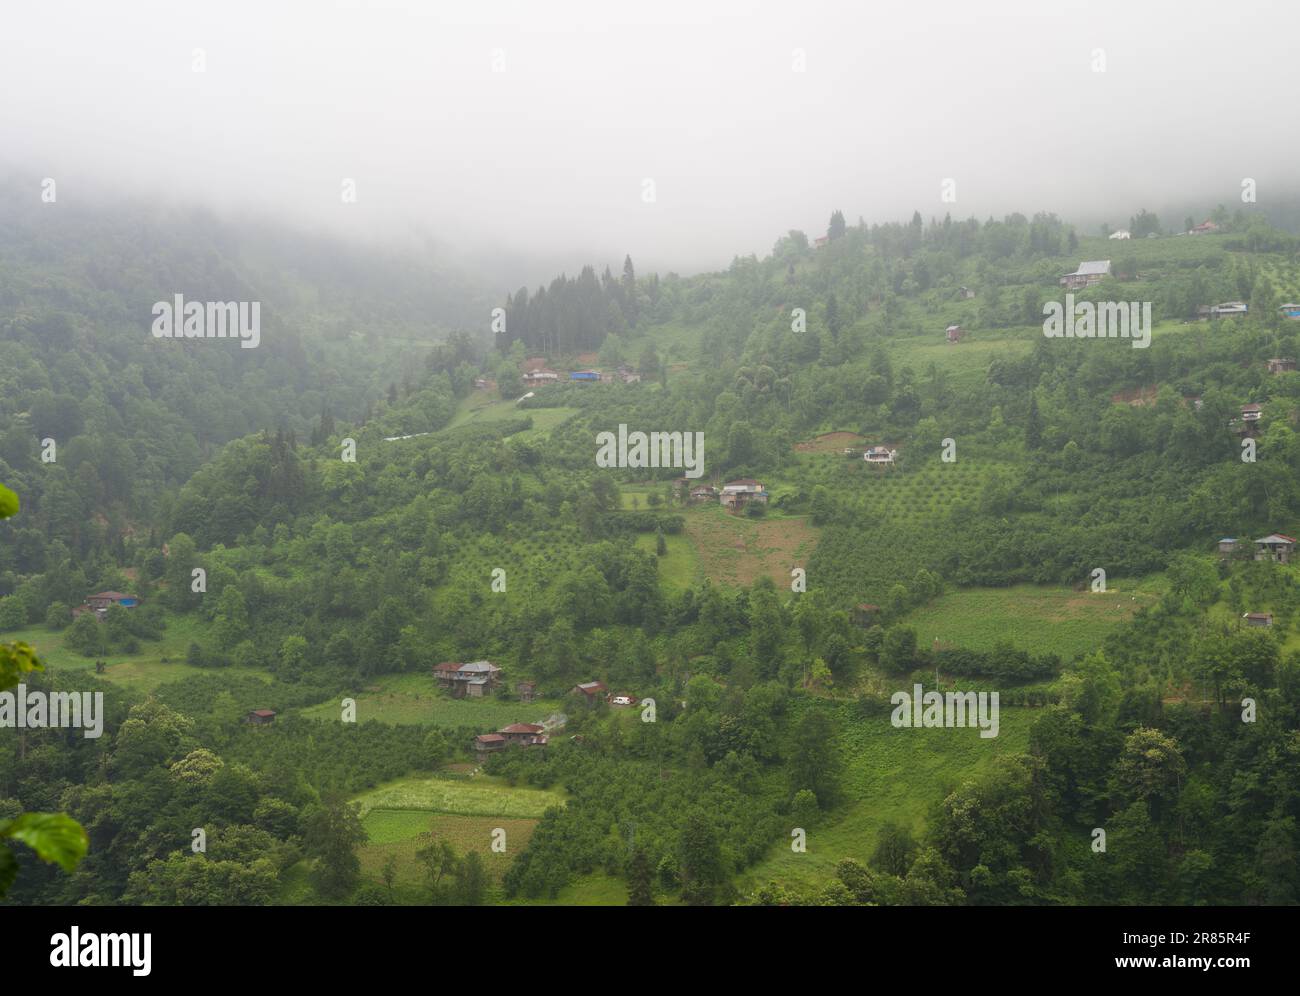 Macahel plateau summer view. Black Sea plateau houses and agricultural lands. Macahel plateau is the touristic point of Artvin province. Camili villag Stock Photo